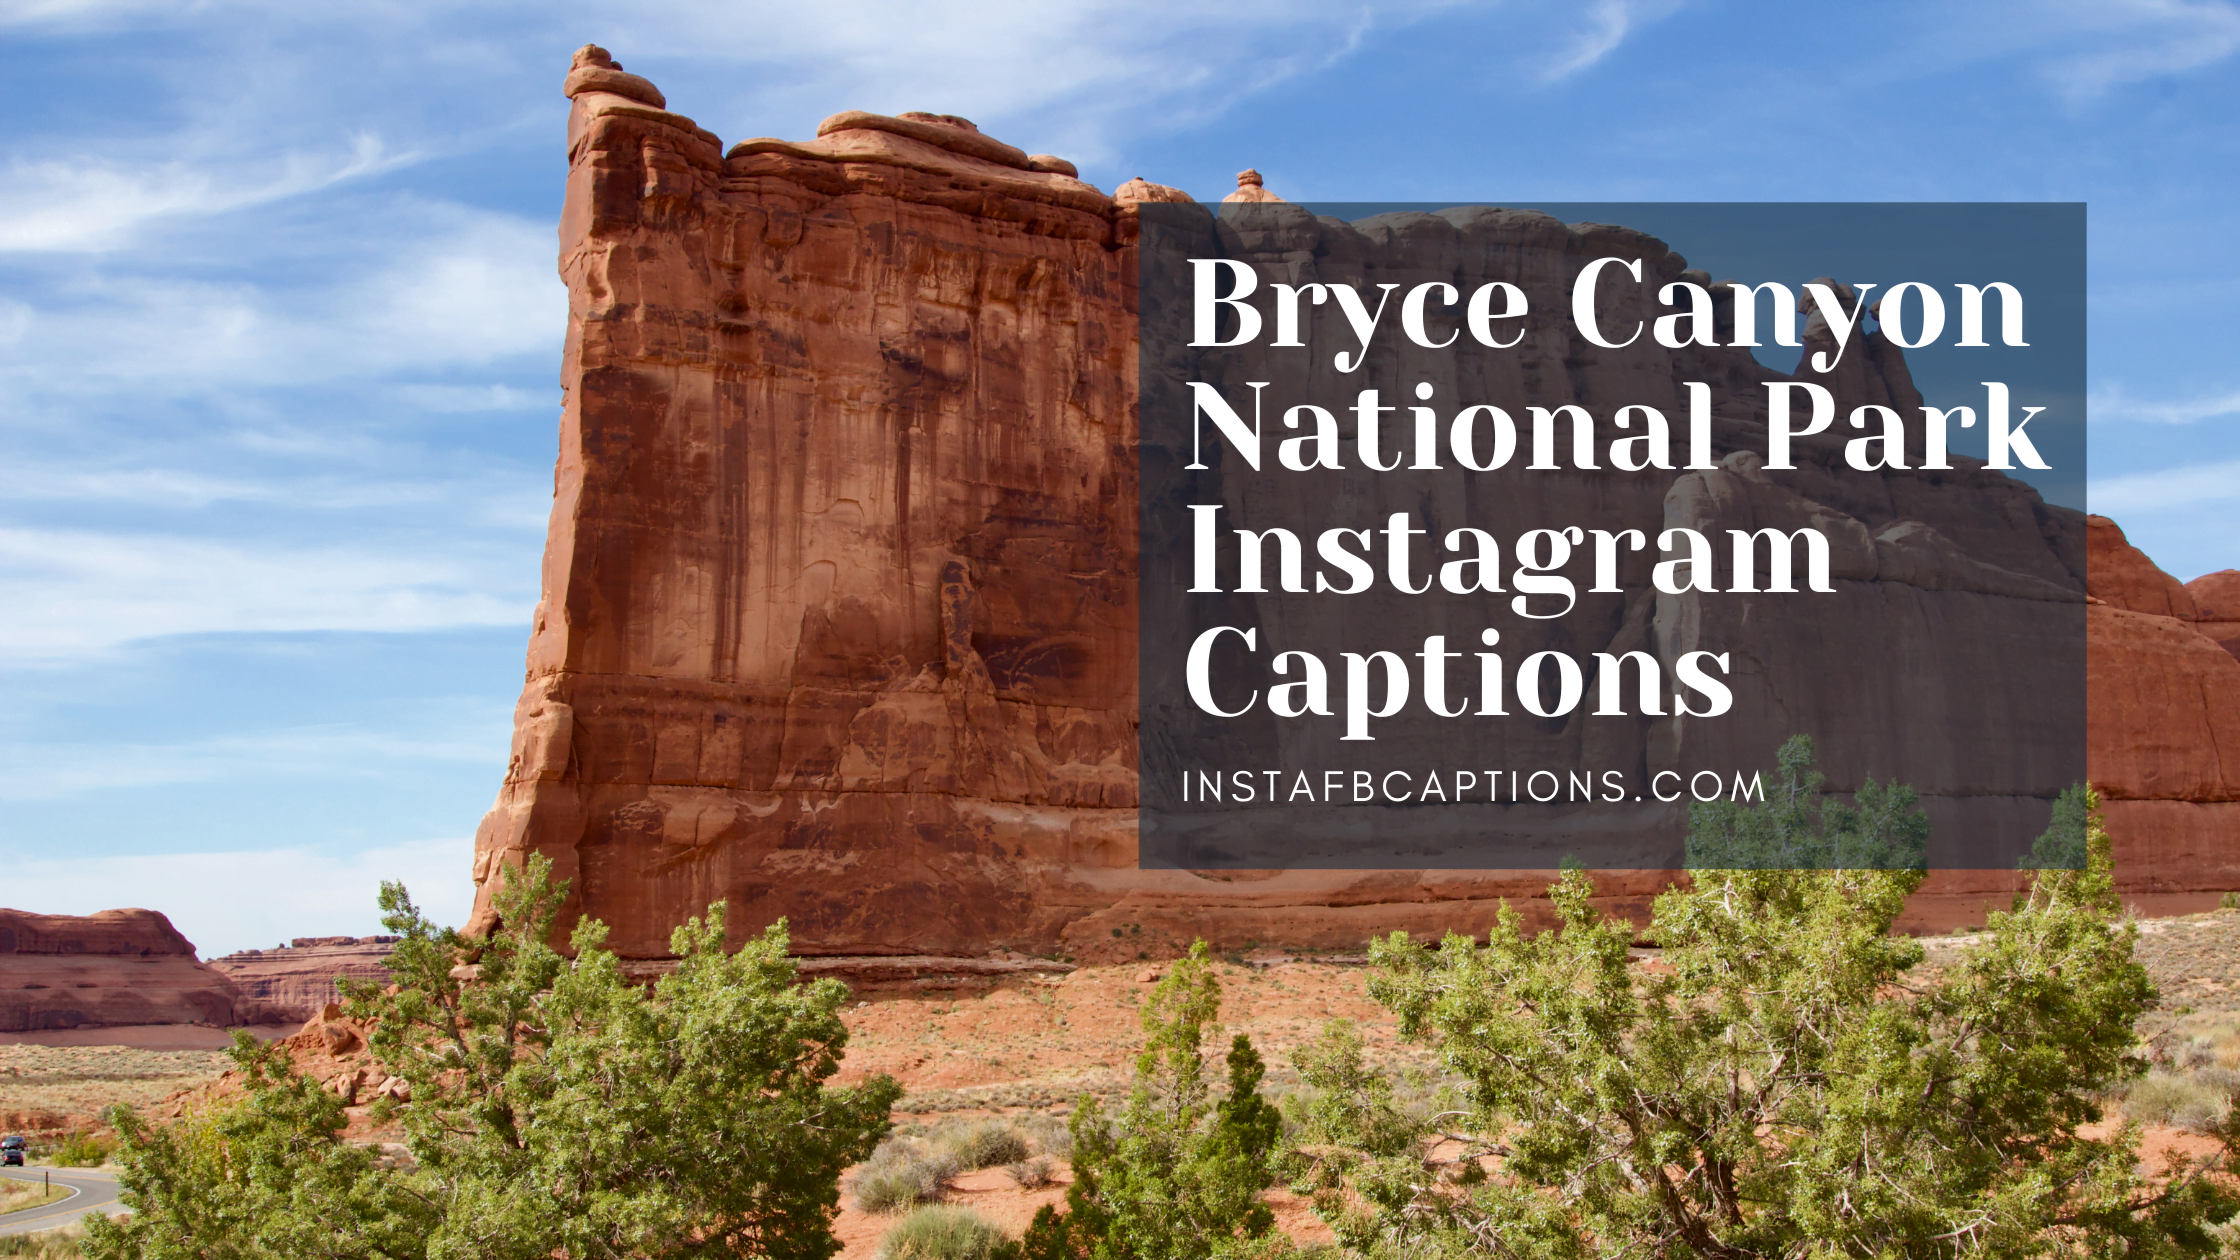 Bryce Canyon National Park Instagram Captions  - Bryce Canyon National Park Instagram Captions - 88 Bryce Canyon National Park Instagram Captions in 2023